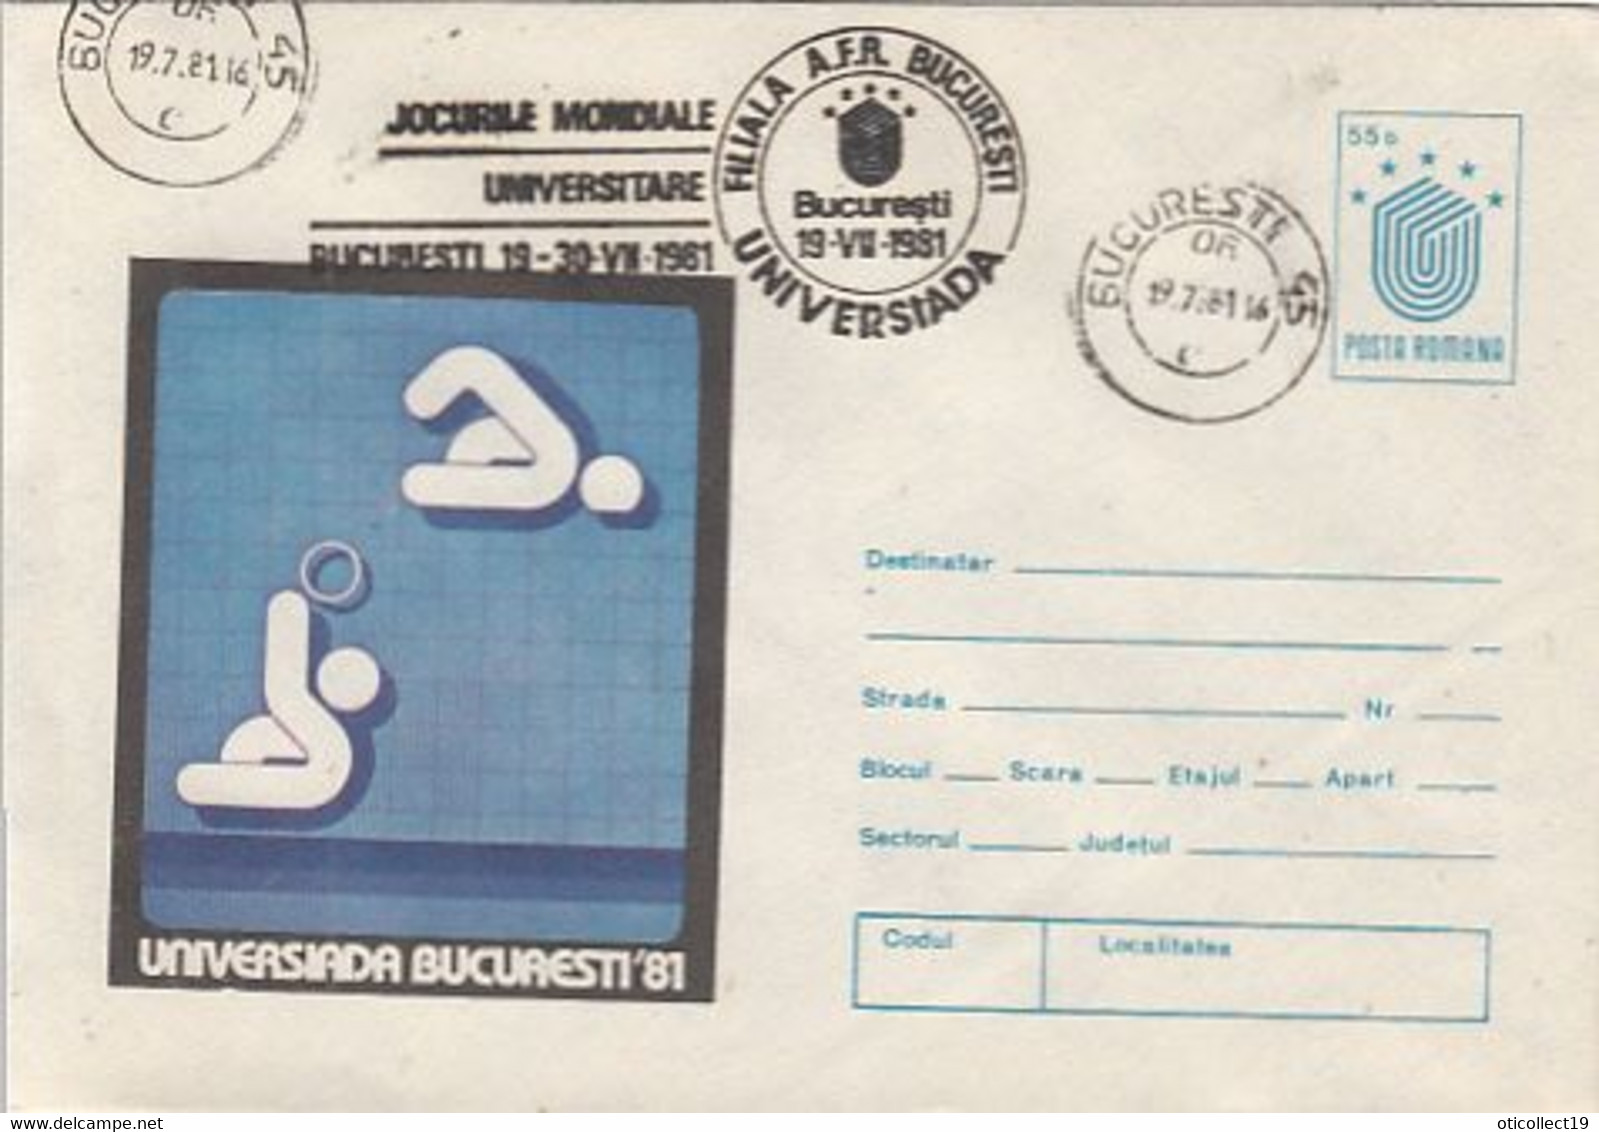 SPORTS, WATER POLO, WORLD UNIVERSITY GAMES, COVER STATIONERY, 1981, ROMANIA - Water-Polo